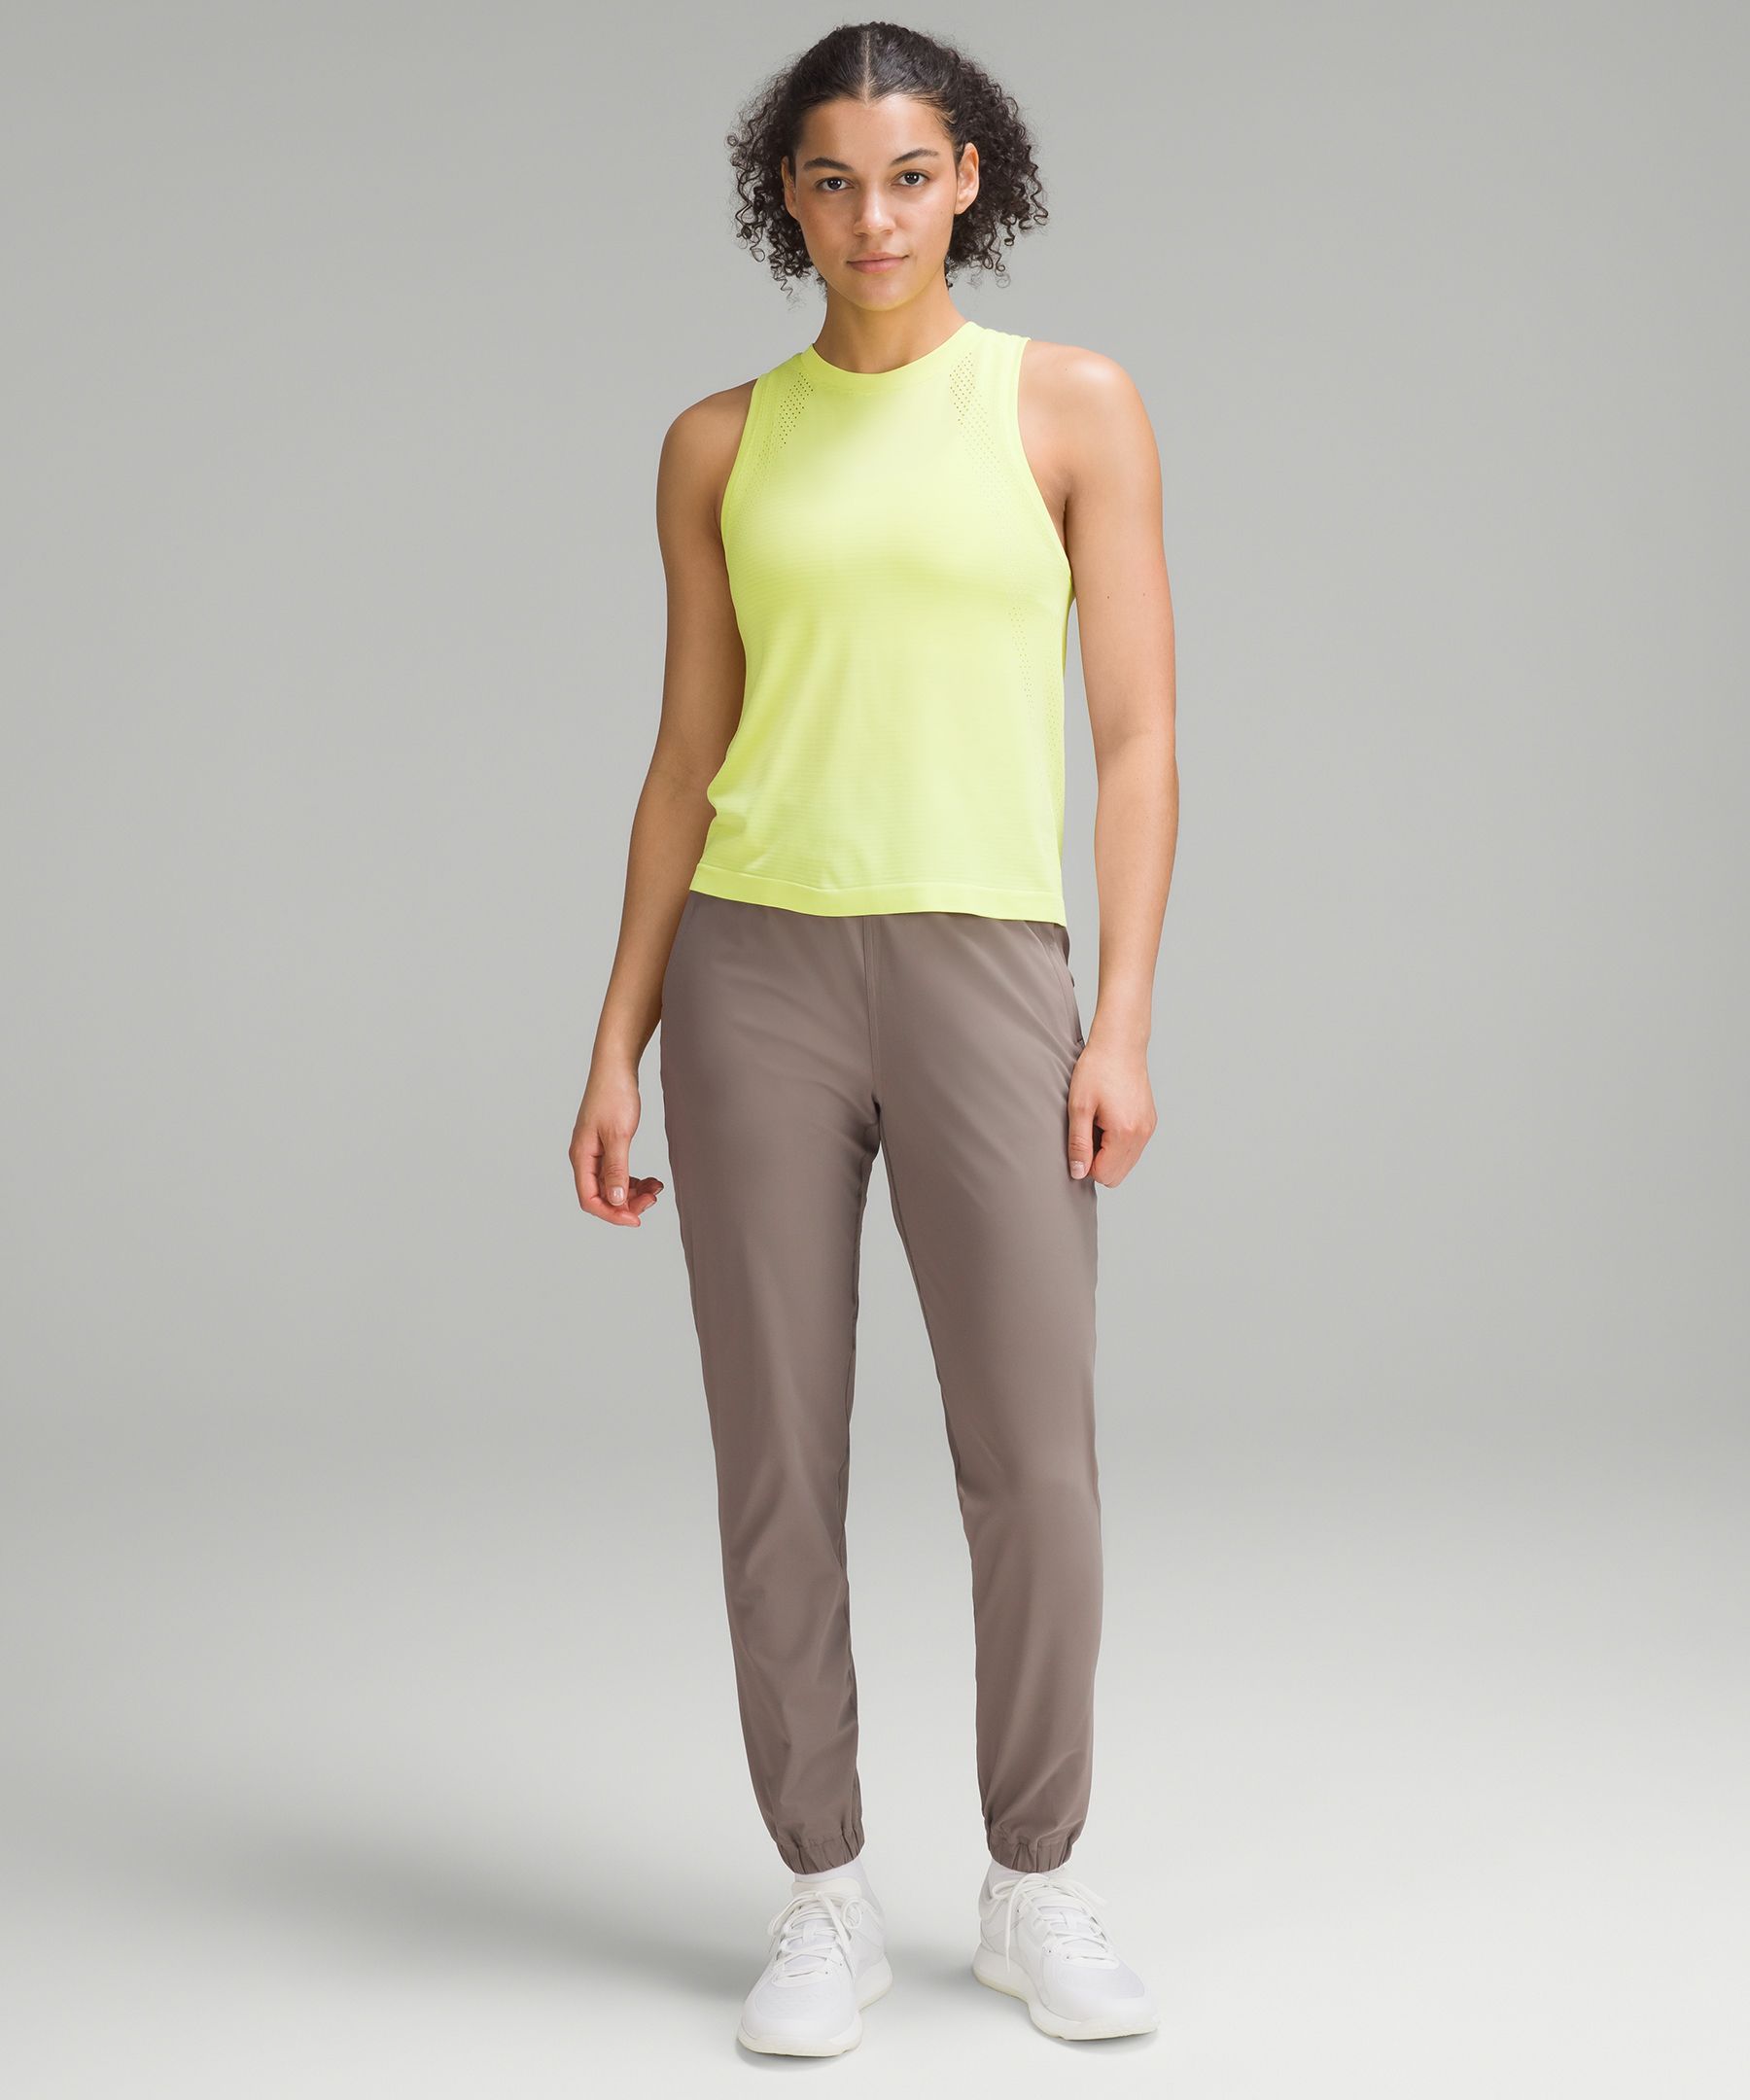 NWT Lululemon Adapted State HR Jogger Size 4 Rhino Grey 28” Sold Out!